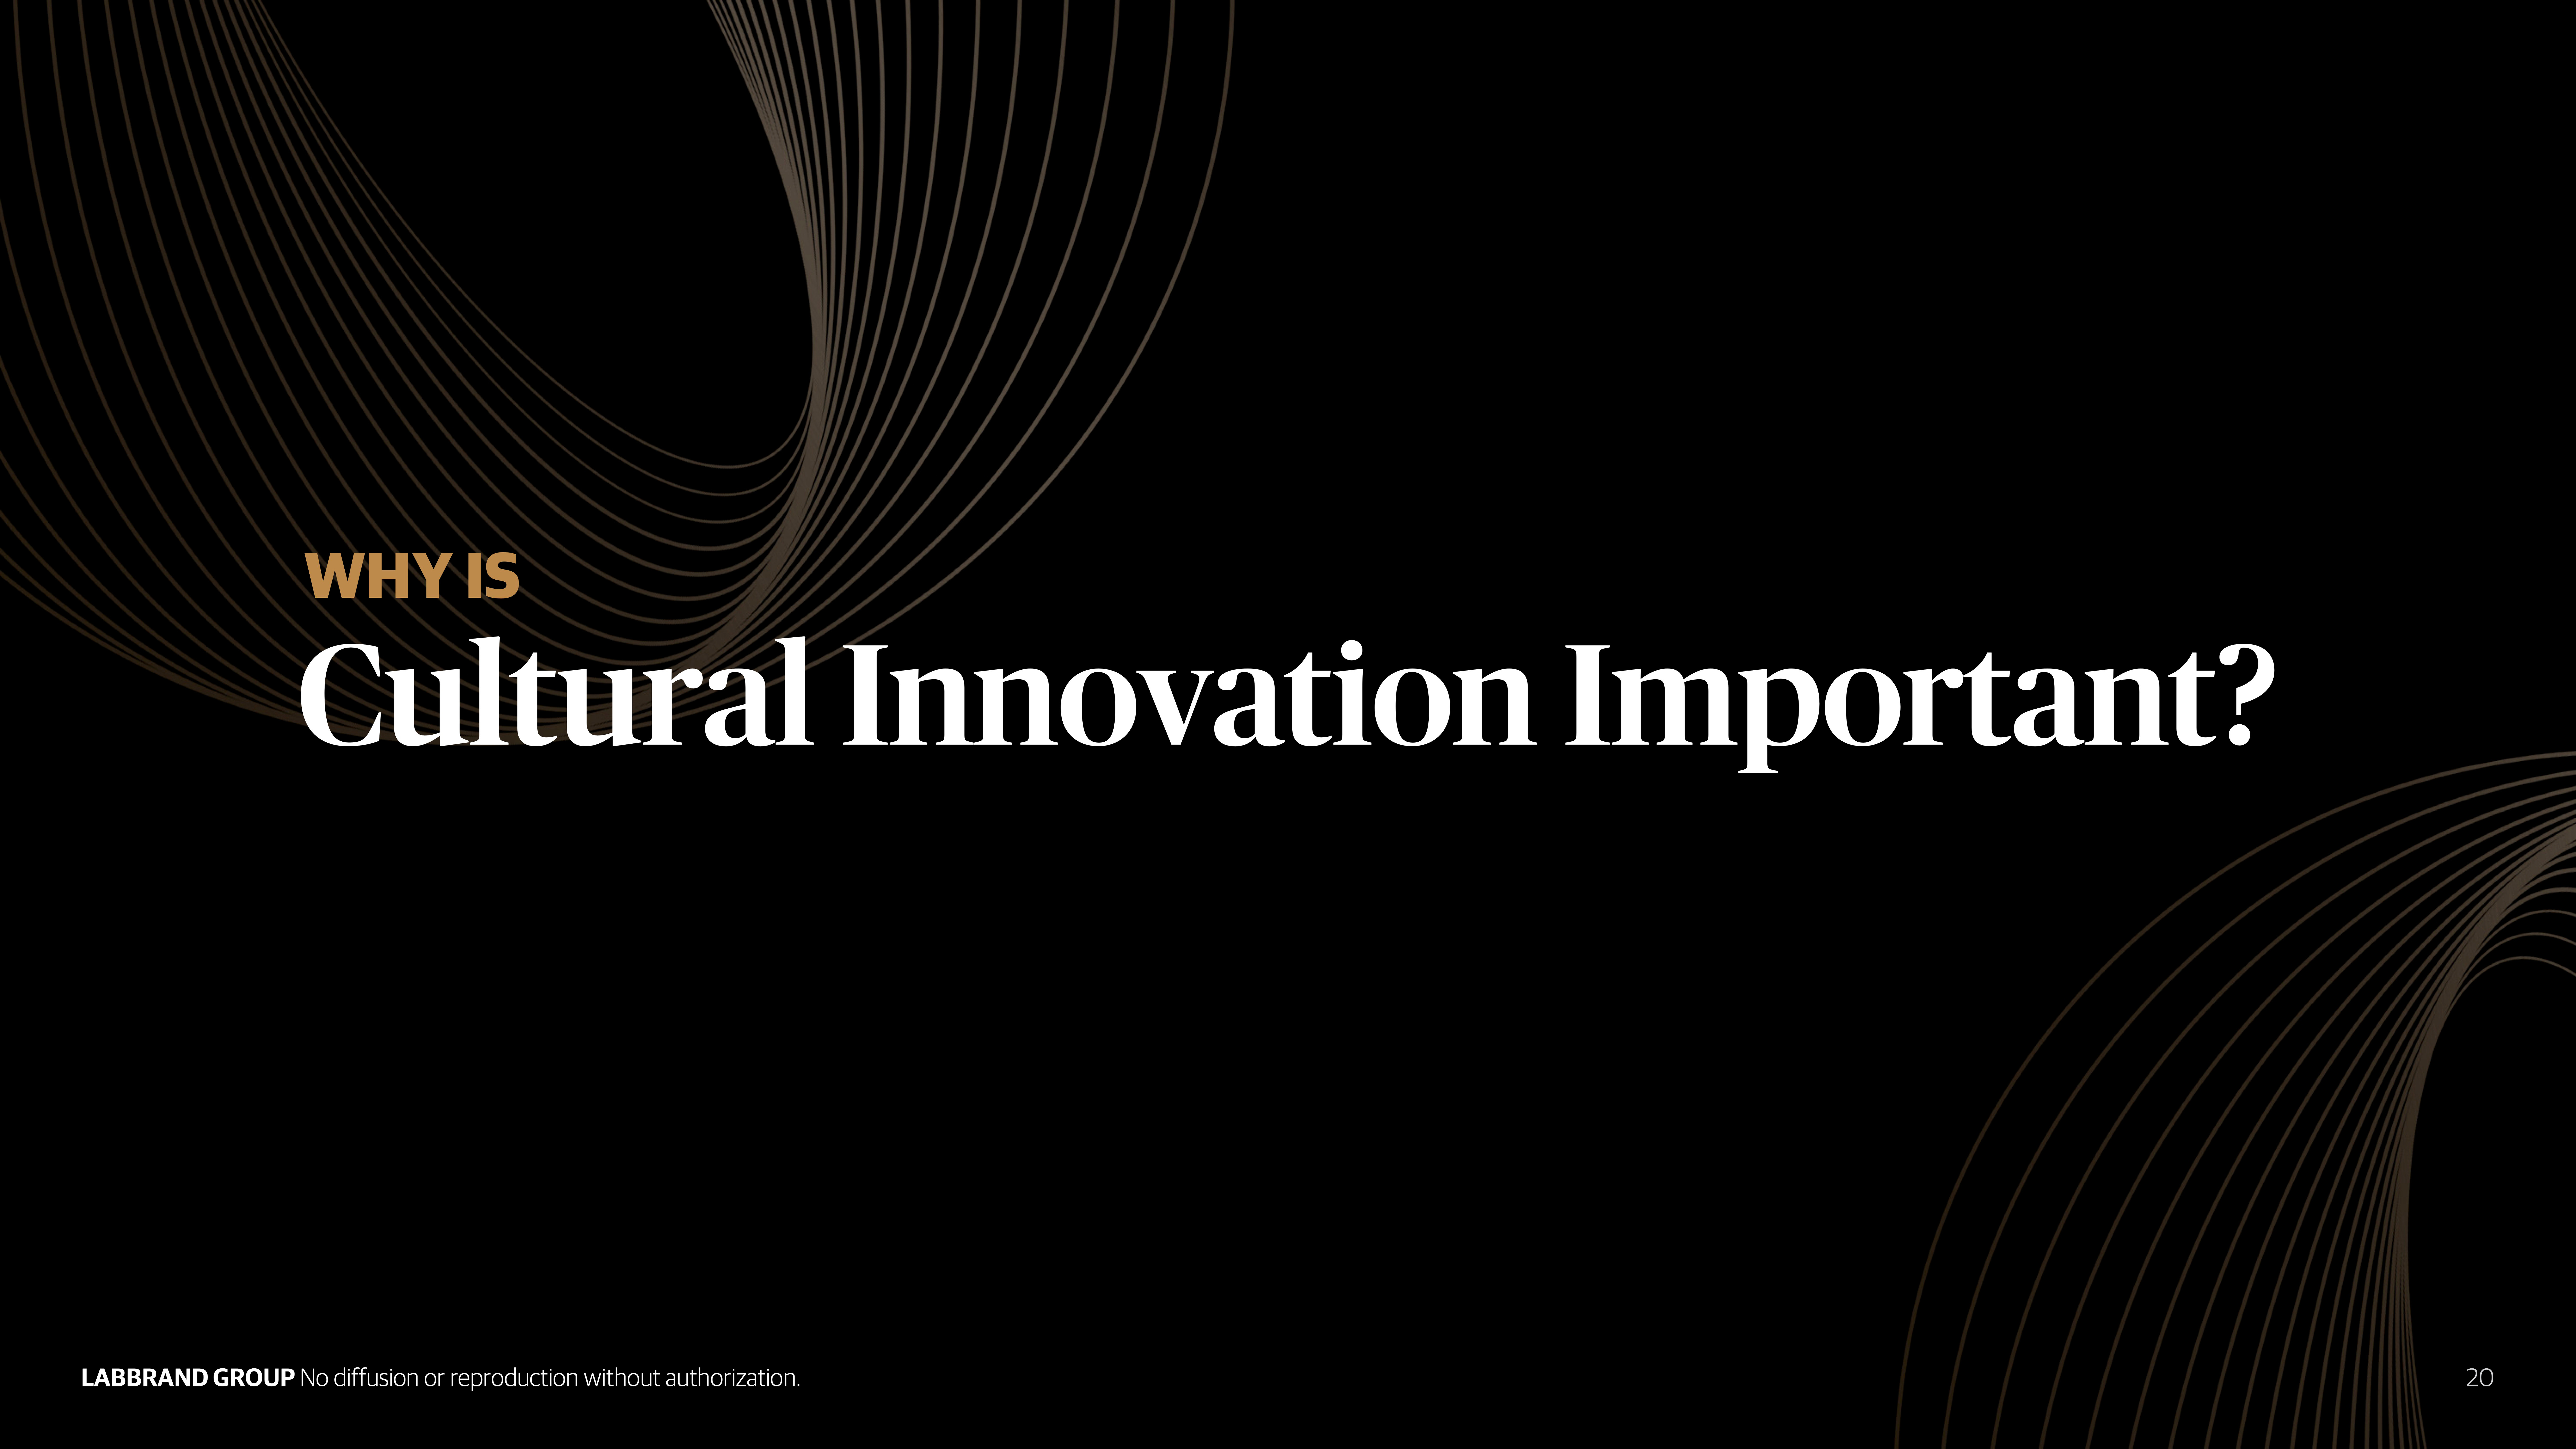 Why is cultural innovation important